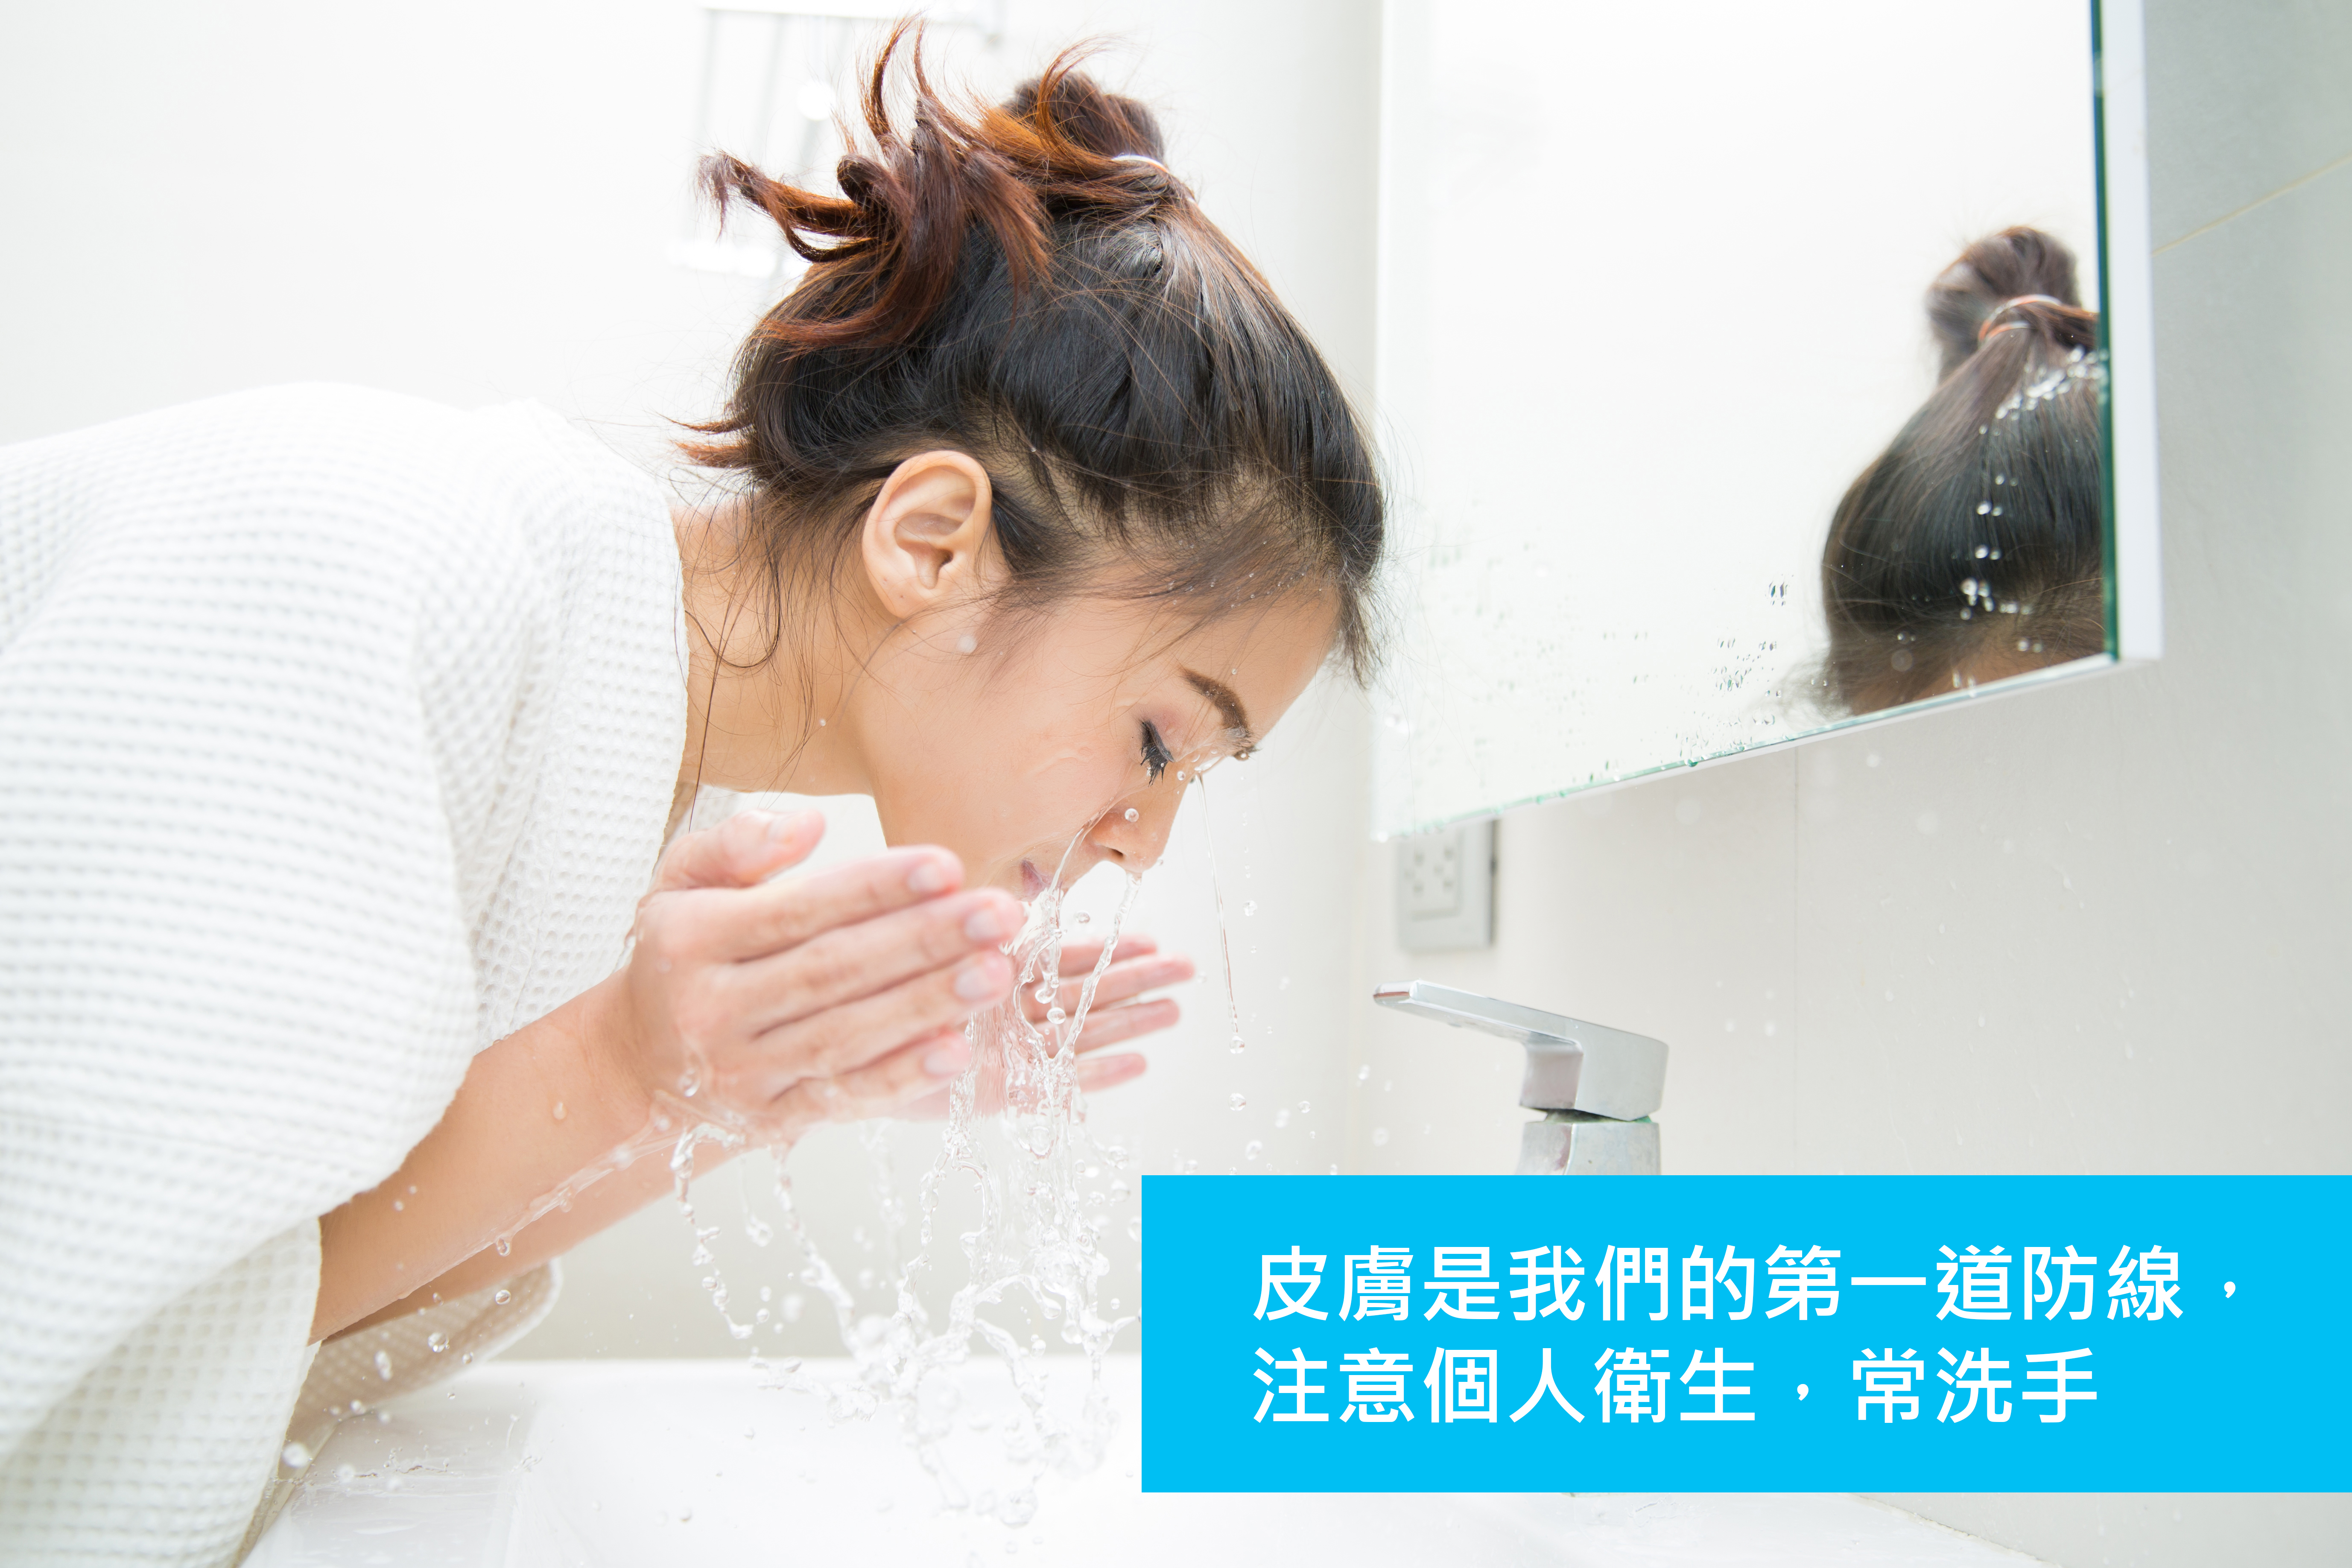 Woman wakes from sleep and she was cleansing the morning before